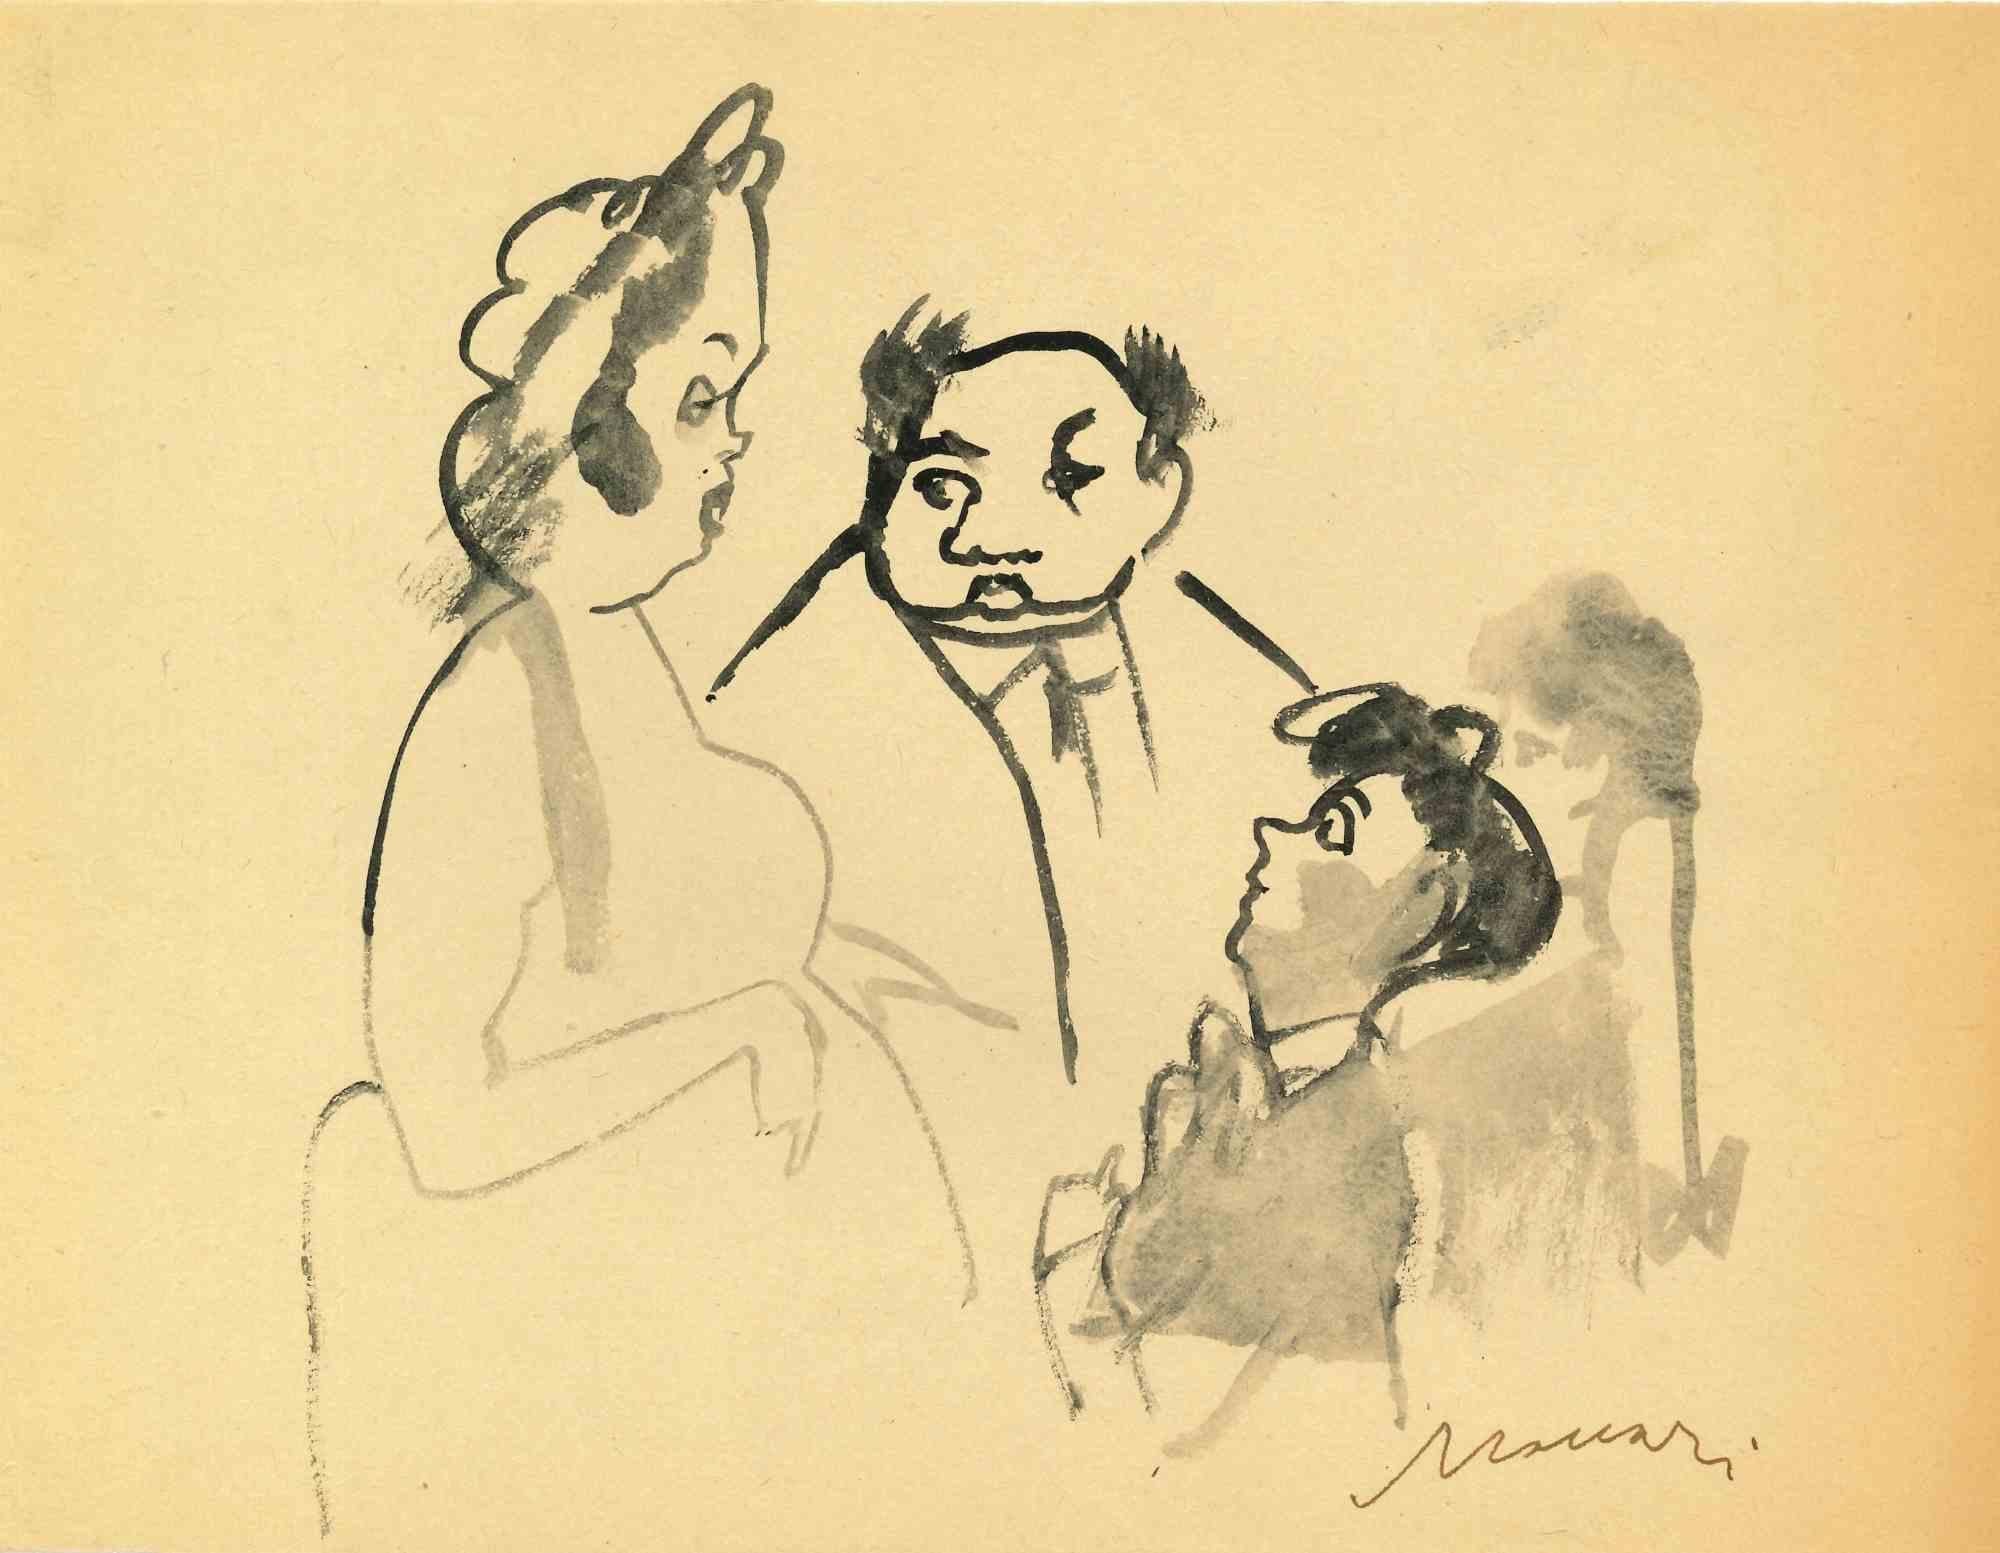 Family Meeting is a watercolor Drawing realized by Mino Maccari  (1924-1989) in the Mid-20th Century.

Hand-signed on the lower.

Good conditions.

Mino Maccari (Siena, 1924-Rome, June 16, 1989) was an Italian writer, painter, engraver and